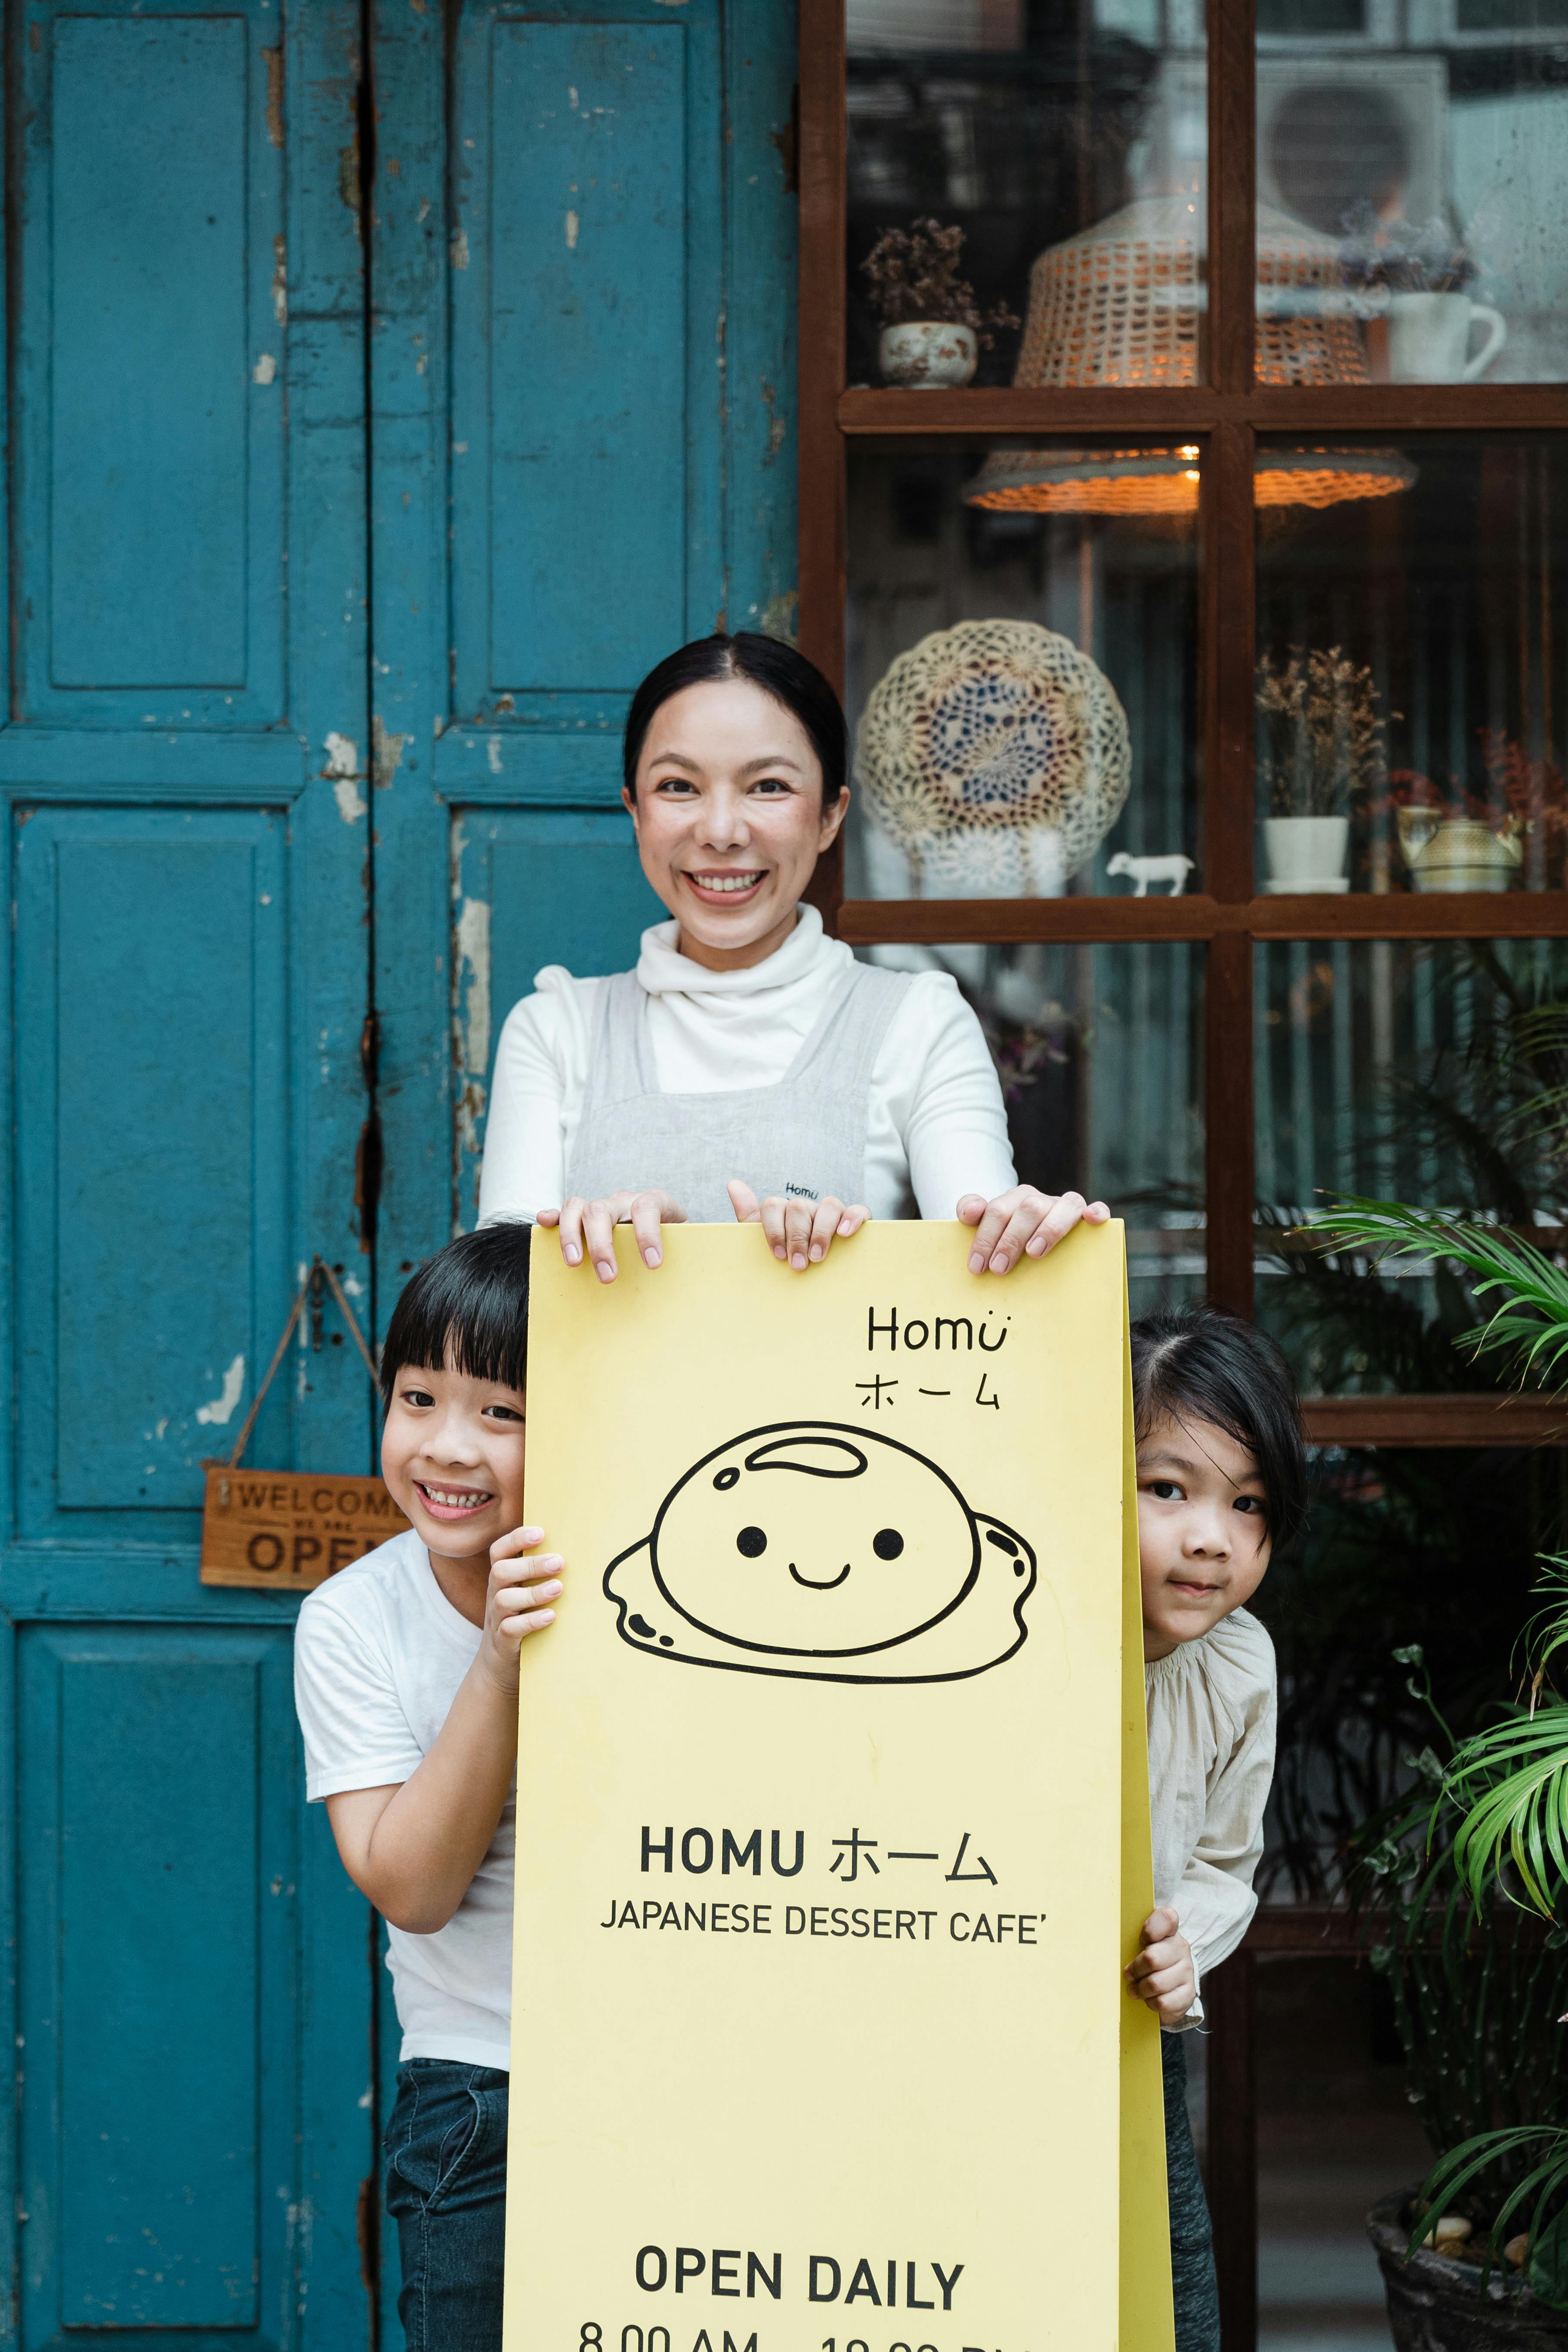 photo of family smiling while standing near signage